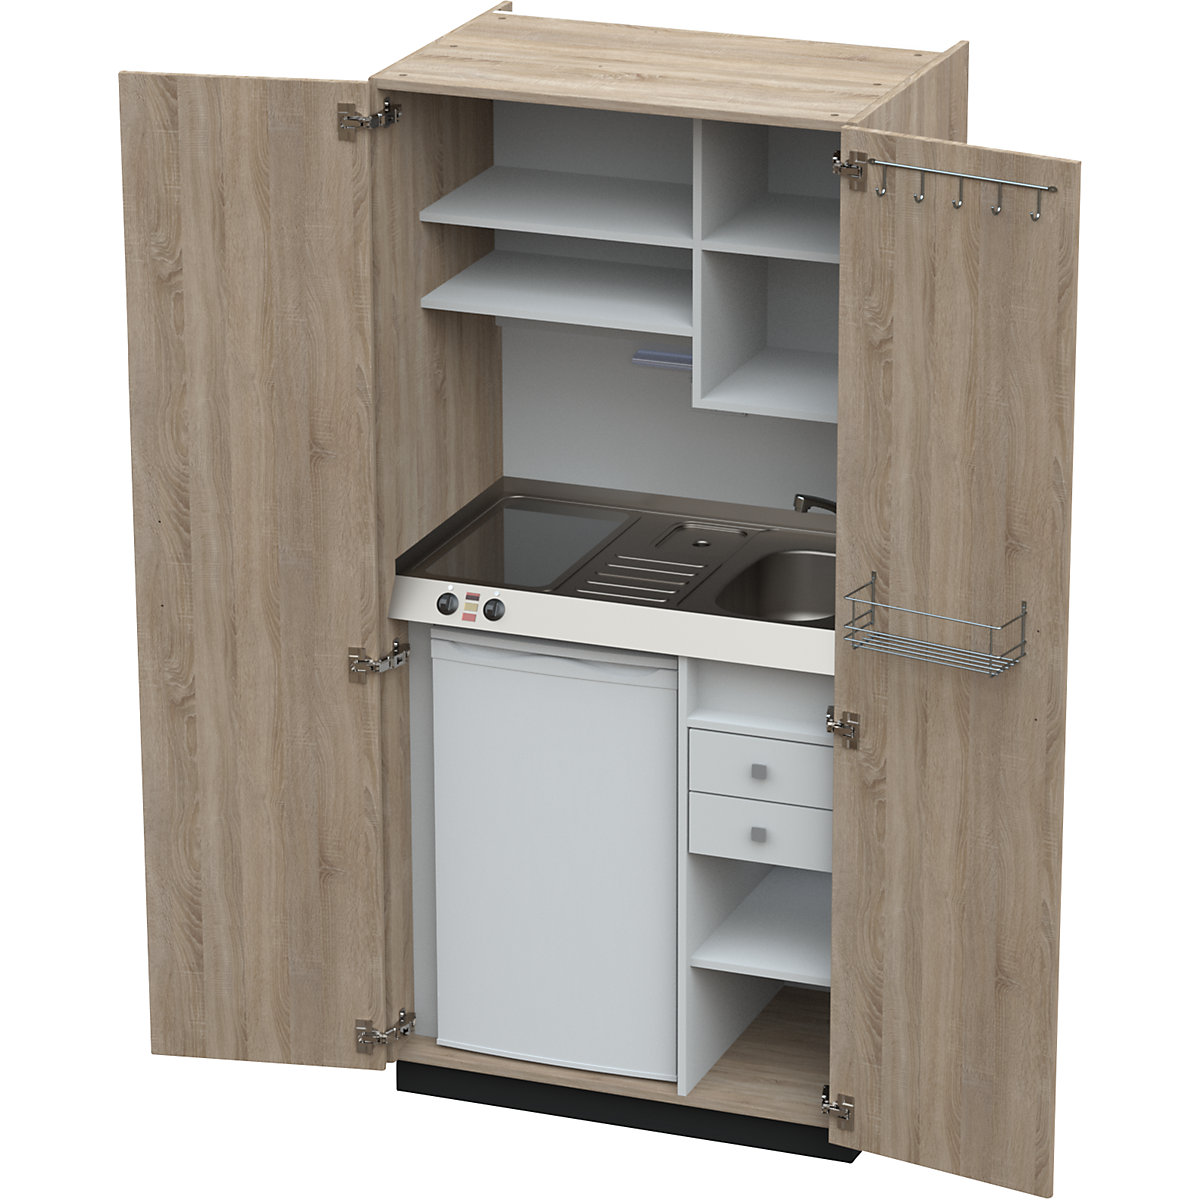 Kitchen unit with hinged doors, 2 glass ceramic hotplates, basin at right, oak, 1956 x 900 x 650 mm-14